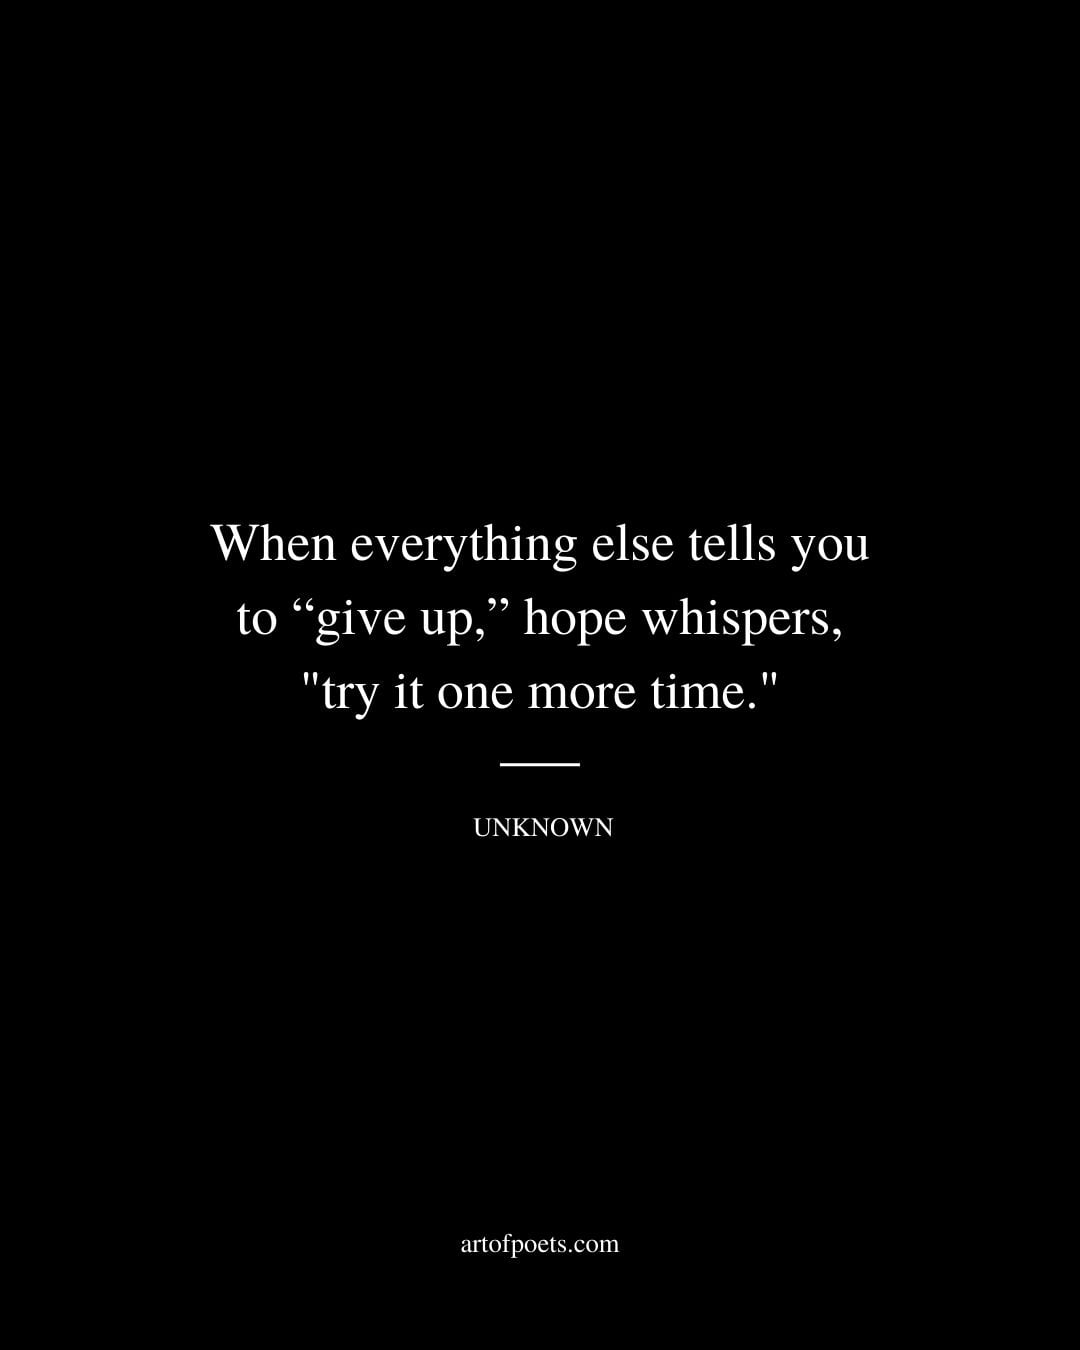 When everything else tells you to give up hope whispers try it one more time. Unknown